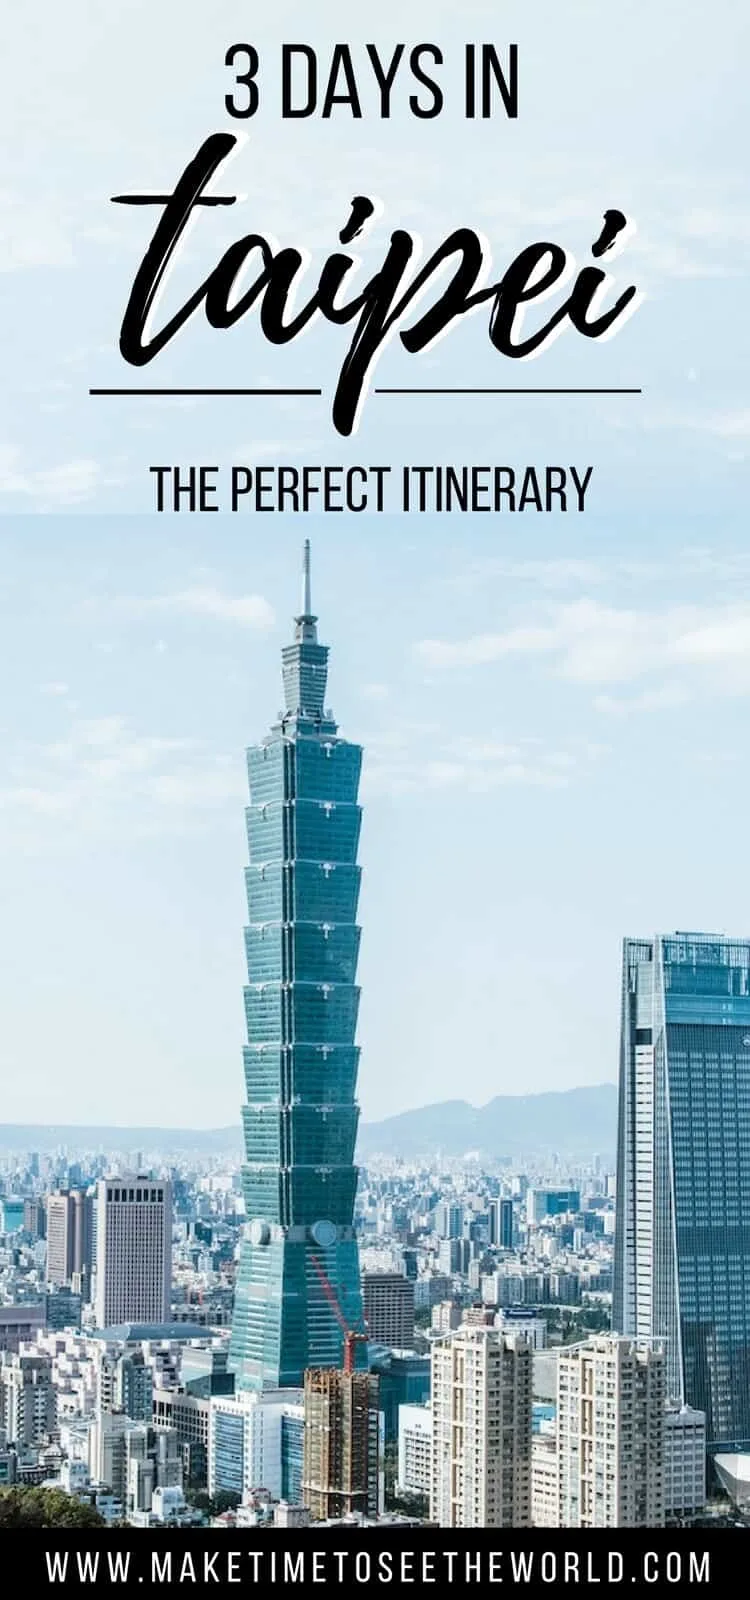 "Taipei Itinerary" text overlay on an image of Taipei's skyline and observation tower